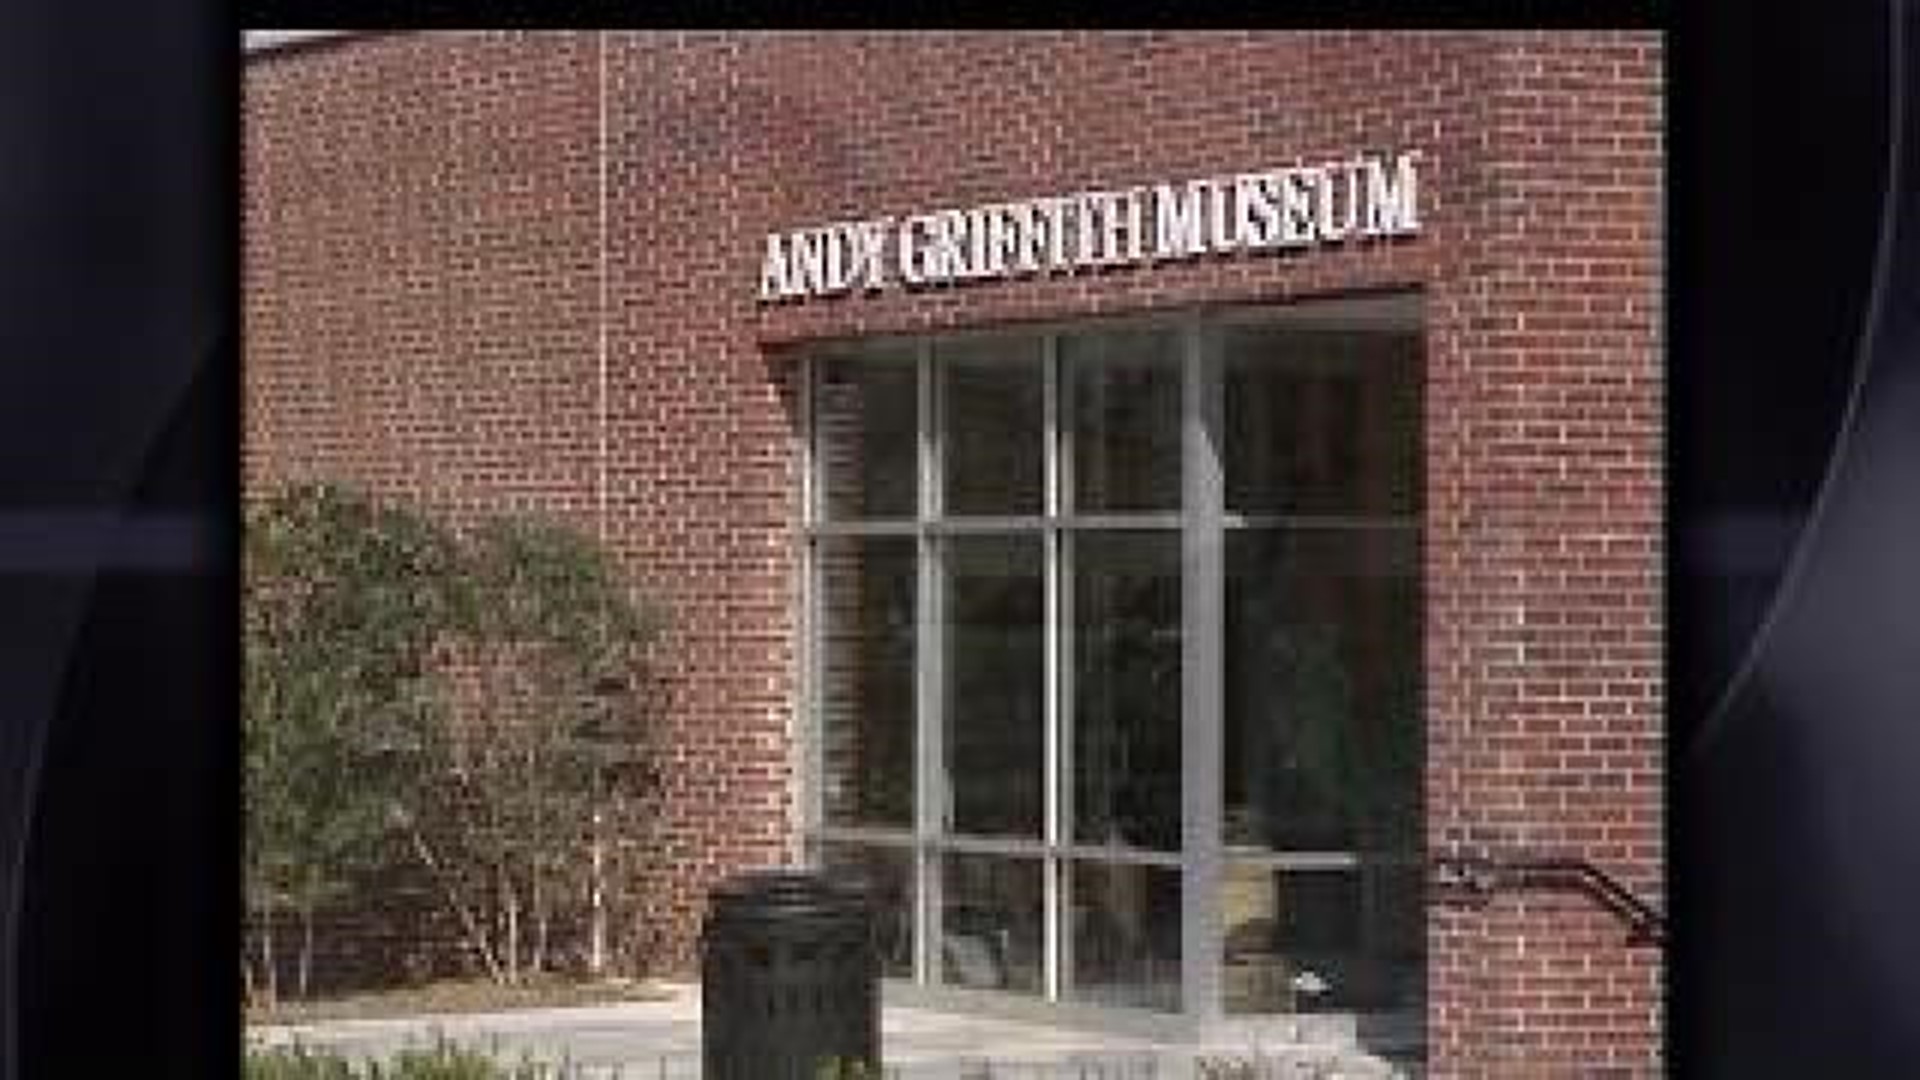 Inside the Andy Griffith Museum